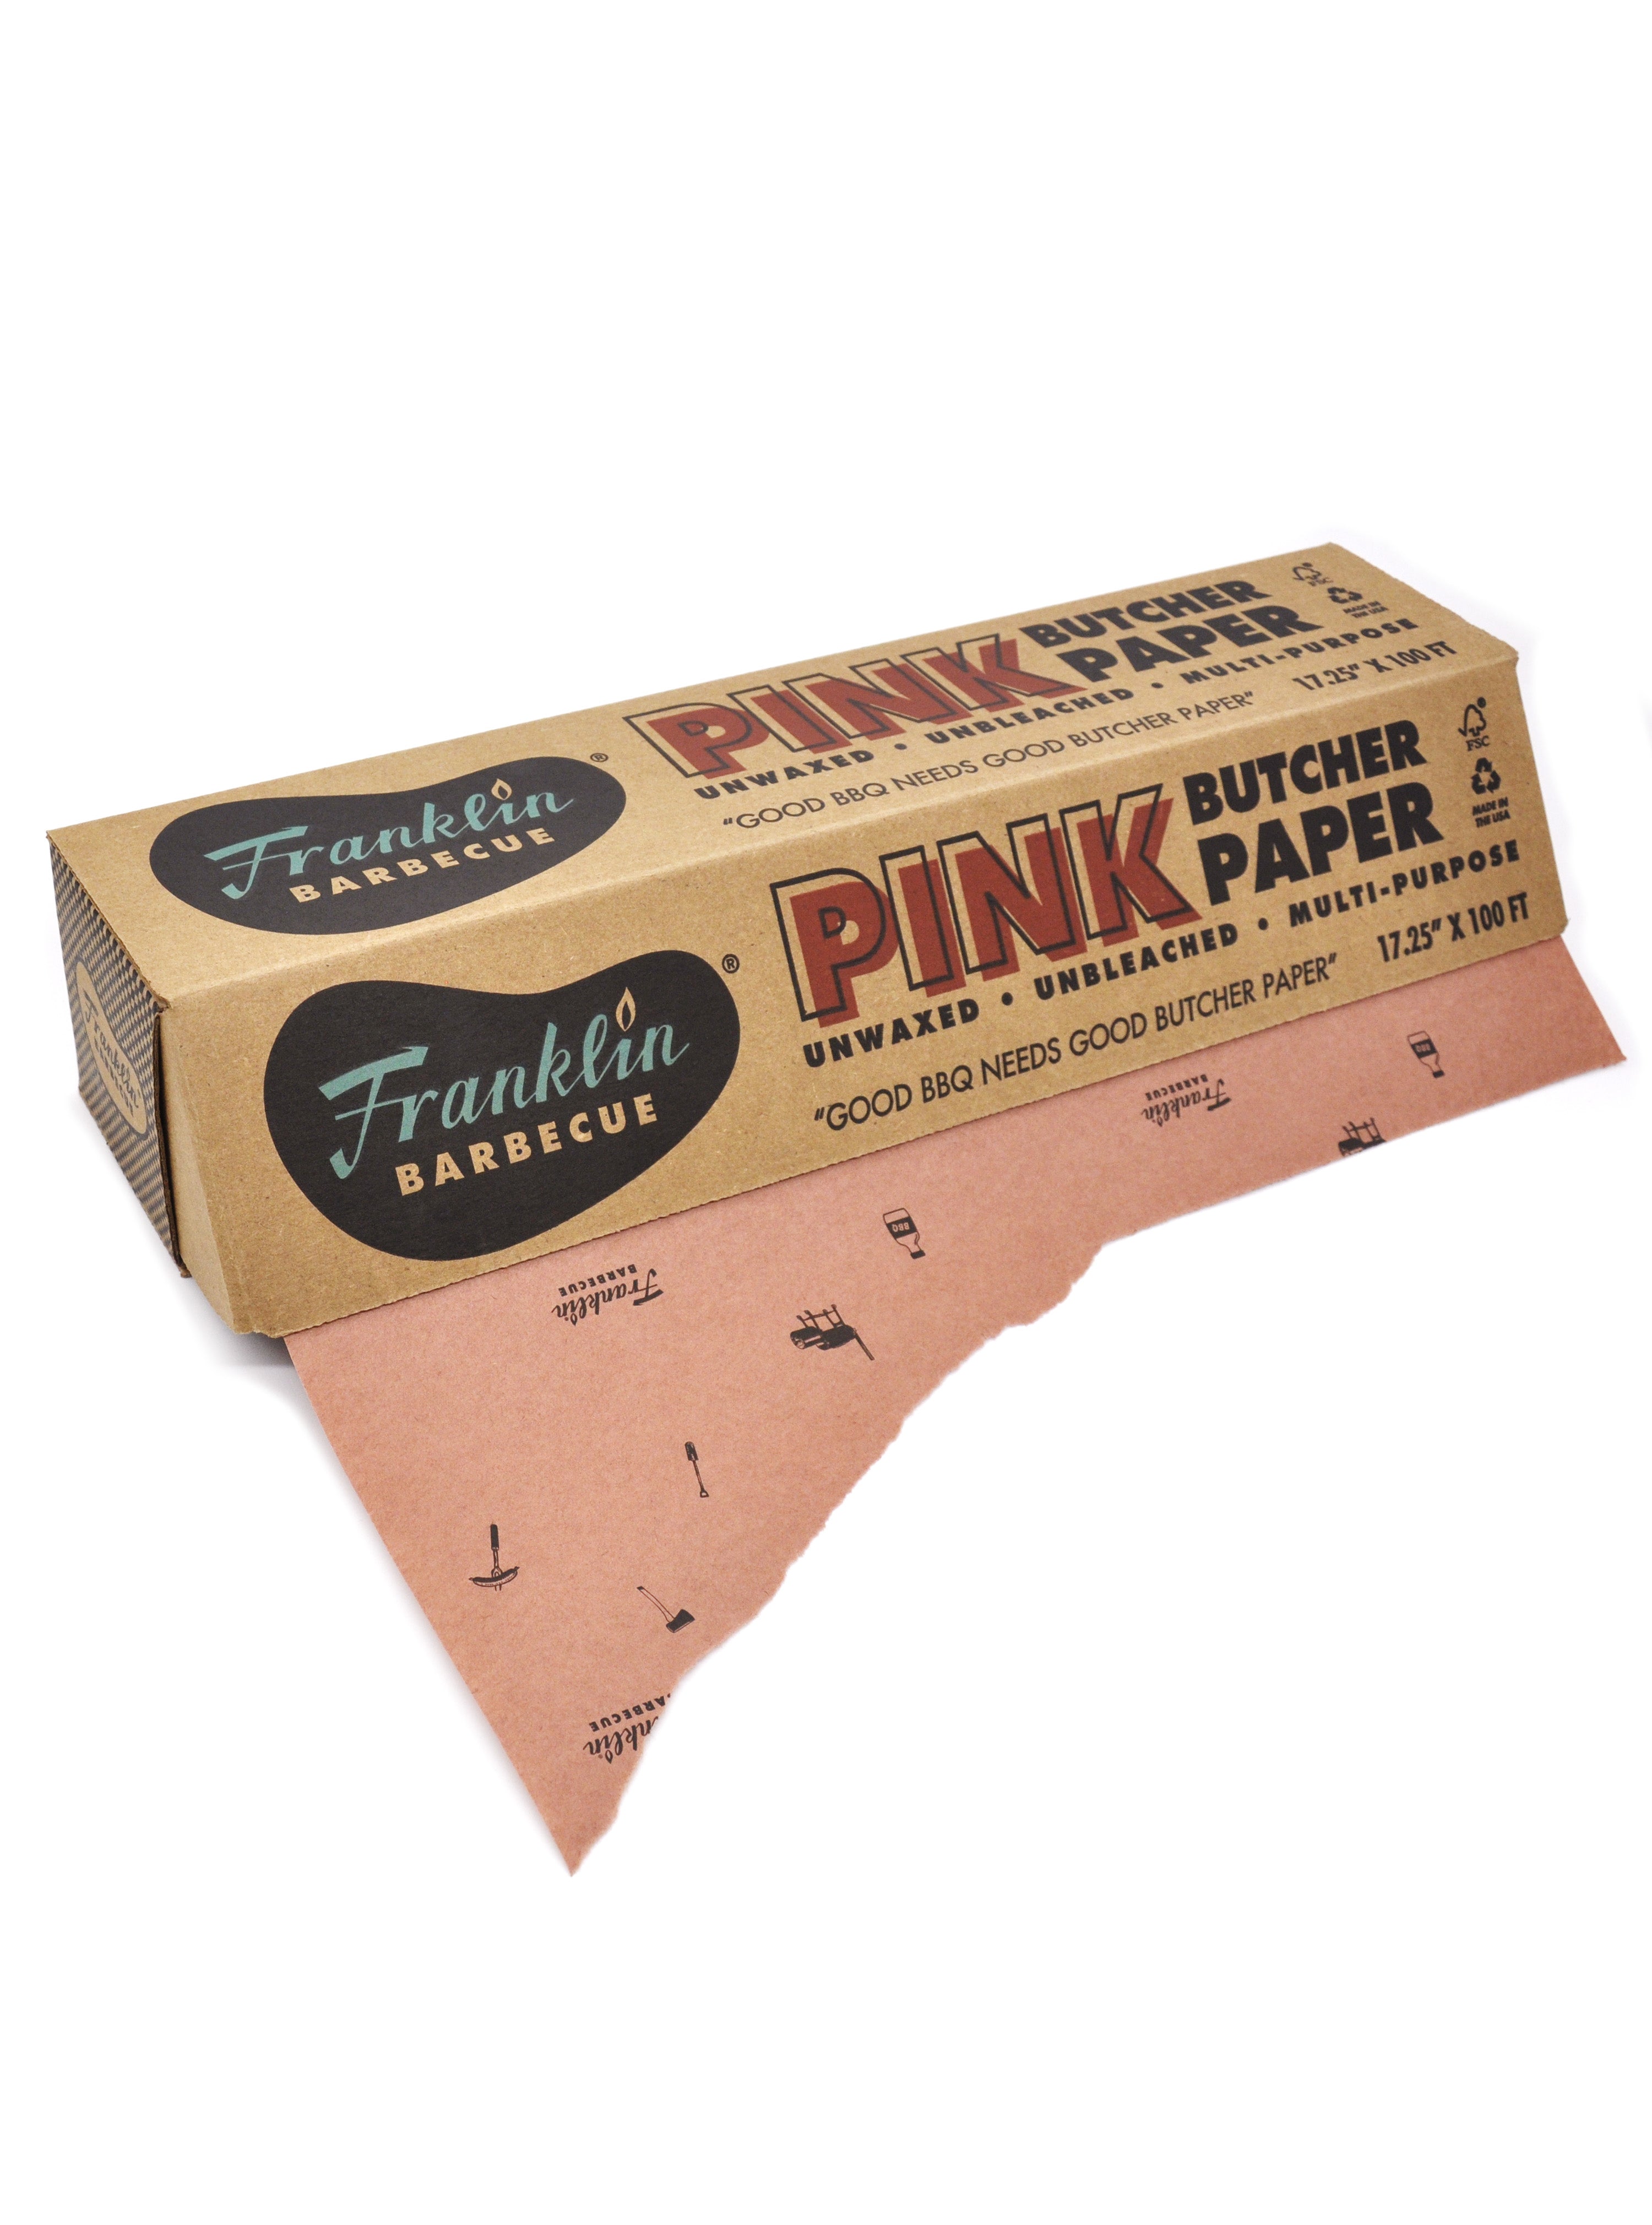 Expert Grill Pink Butcher Paper, 40 lb., Uncoated, 22 x 100' 